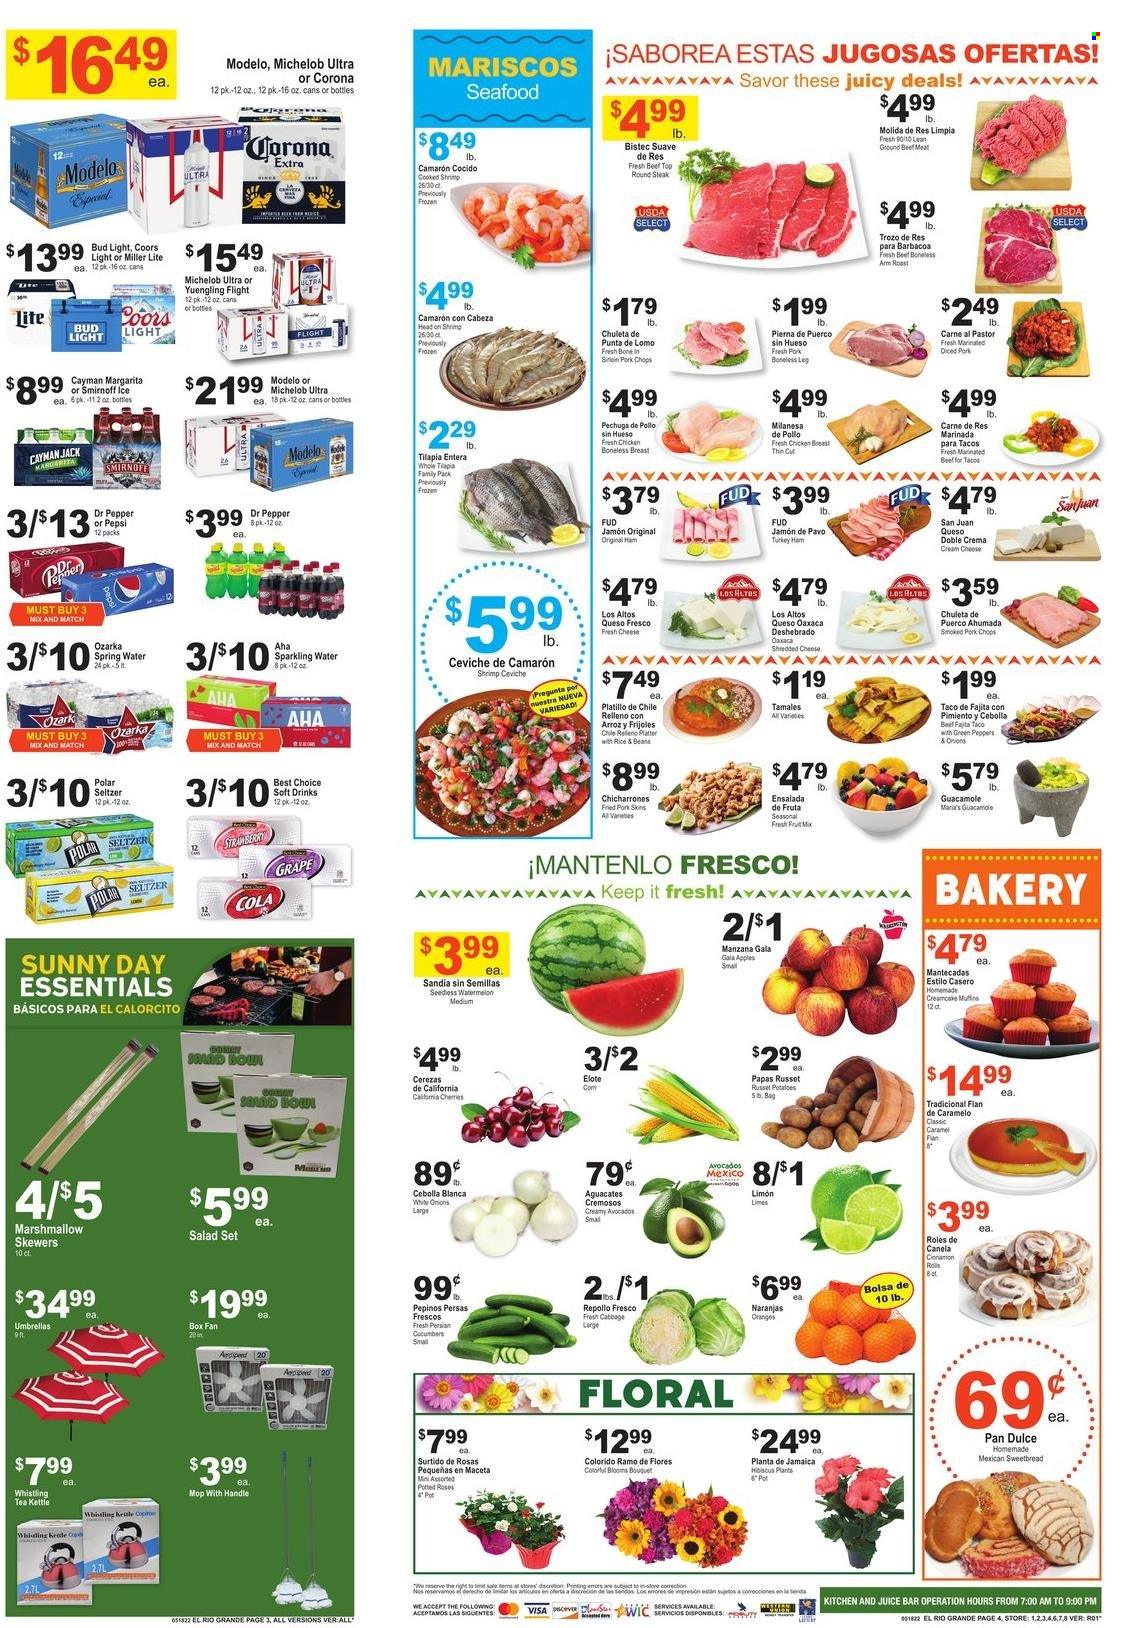 thumbnail - El Rio Grande Flyer - 05/18/2022 - 05/24/2022 - Sales products - sweet bread, beans, cucumber, russet potatoes, potatoes, salad, peppers, apples, Gala, limes, watermelon, cherries, oranges, tilapia, seafood, shrimps, fajita, ham, guacamole, cream cheese, shredded cheese, queso fresco, marshmallows, fruit mix, cinnamon, caramel, Pepsi, Dr. Pepper, soft drink, seltzer water, spring water, sparkling water, tea, Smirnoff, beer, Bud Light, Corona Extra, Modelo, chicken breasts, beef meat, ground beef, steak, round steak, pork chops, pork meat, Miller Lite, Coors, Yuengling, Michelob. Page 3.